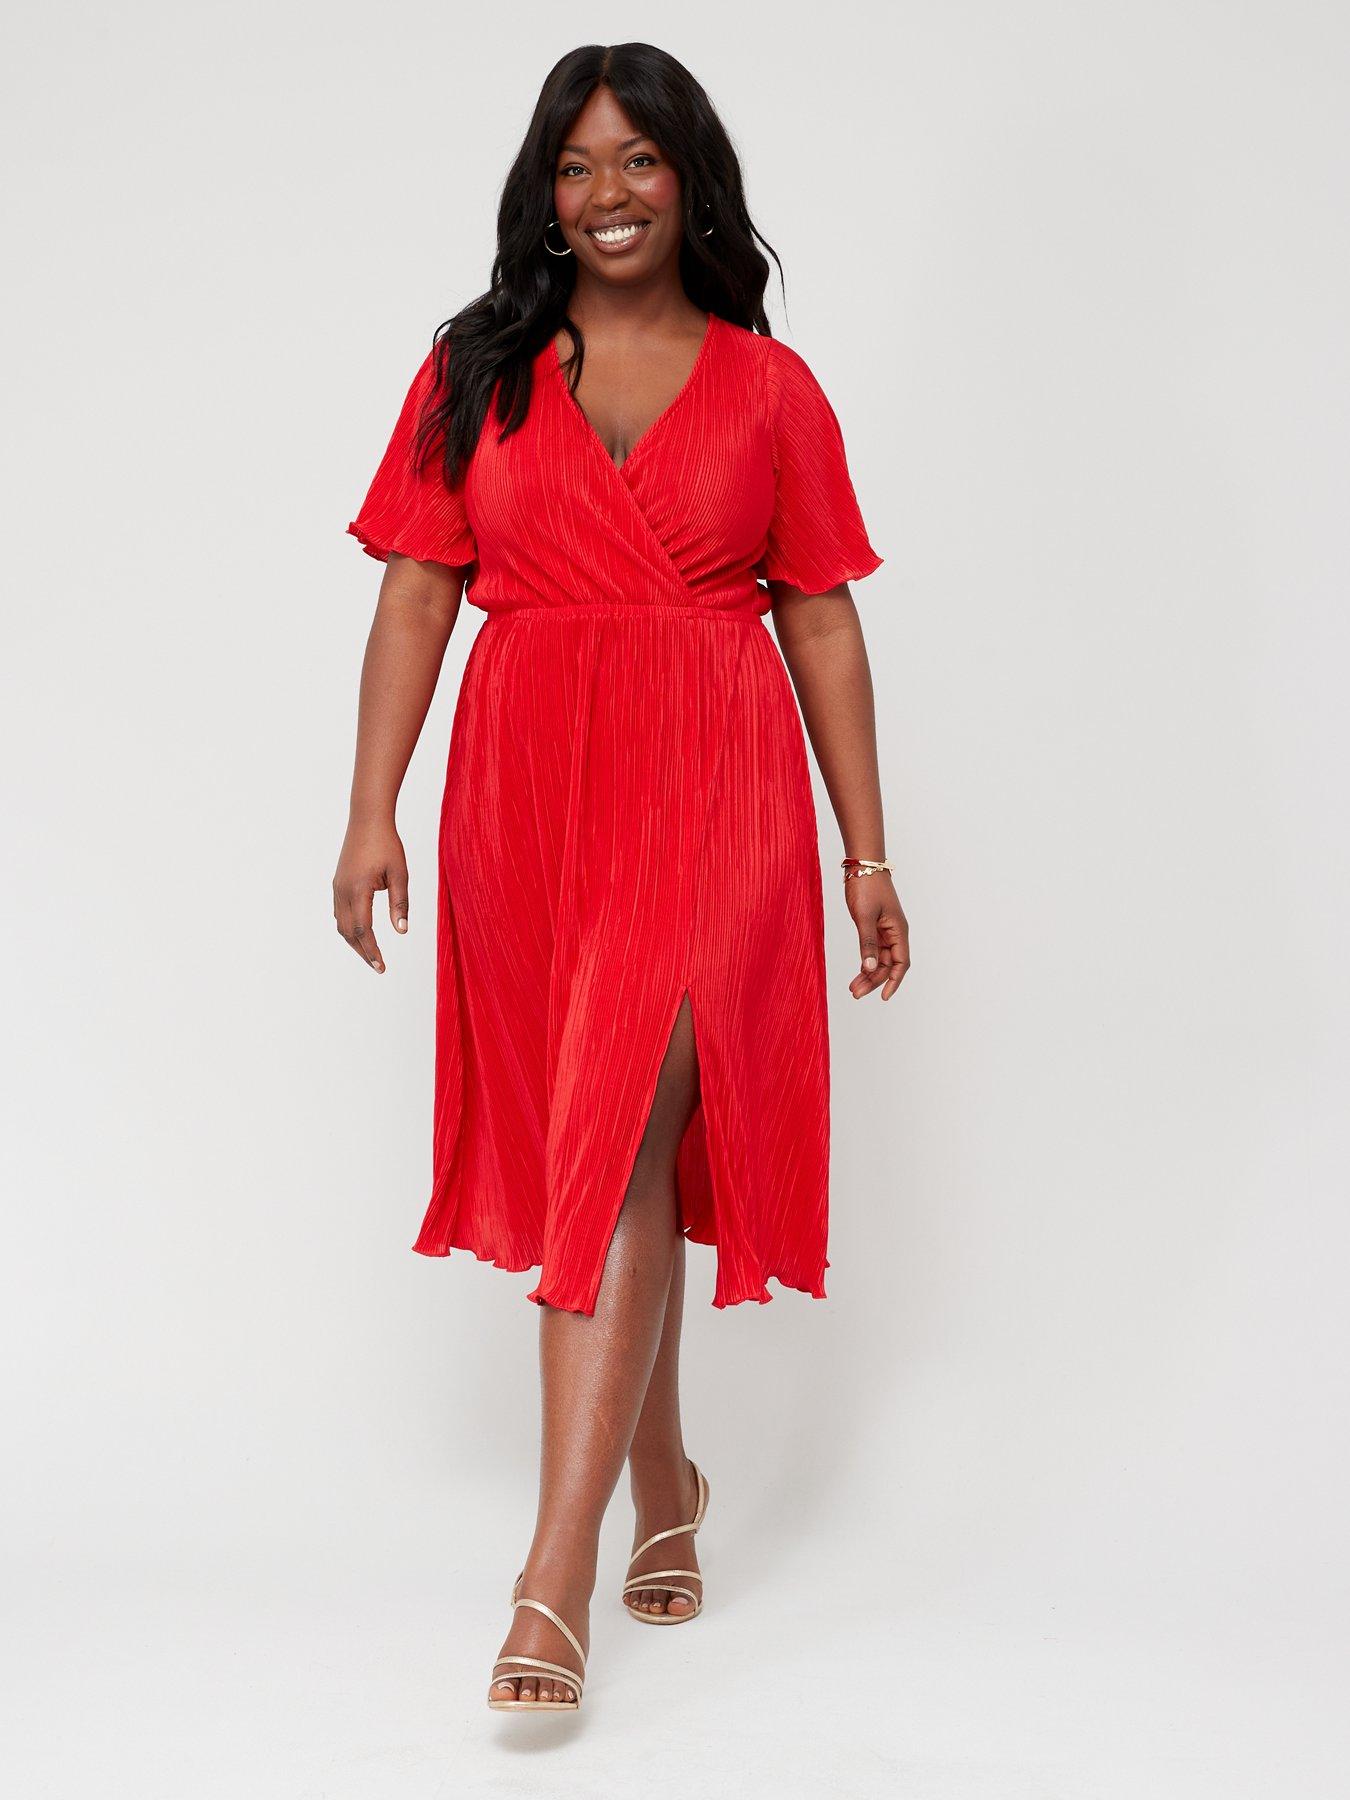 Red Evening Dresses | Online Shopping |